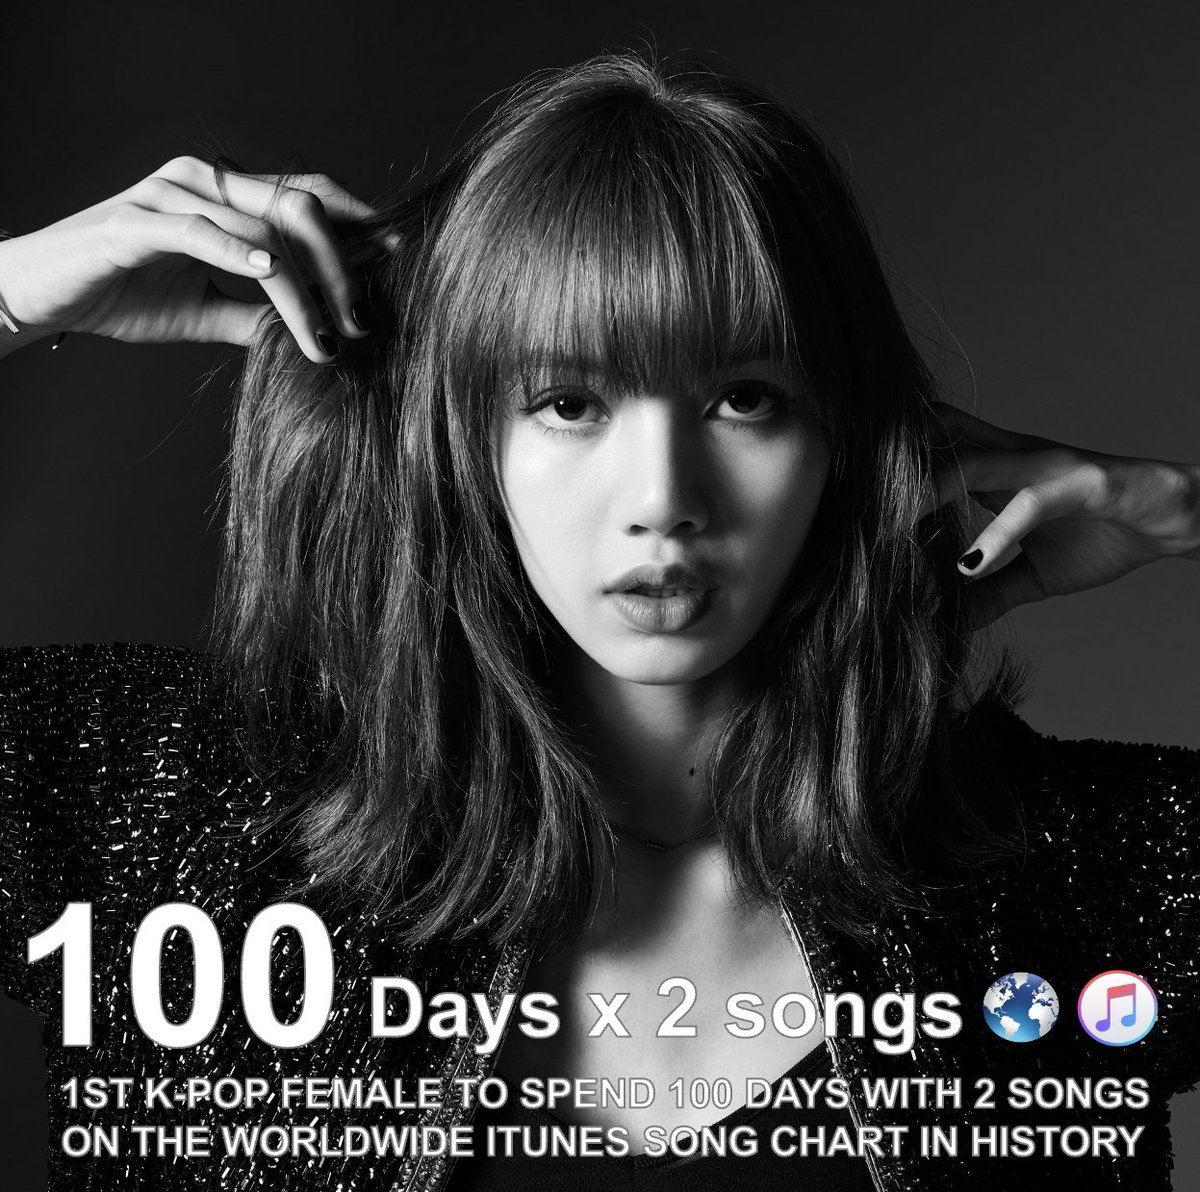 #LISA is the K-Pop Female with the Most Tracks spending 100 days on the Worldwide iTunes song chart (2) in history! 💪🥇🇰🇷👩‍🎤 📈💯🕛🌎🎵✖️2⃣🎶🐐🔥👑🖤

#Lloud @wearelloud